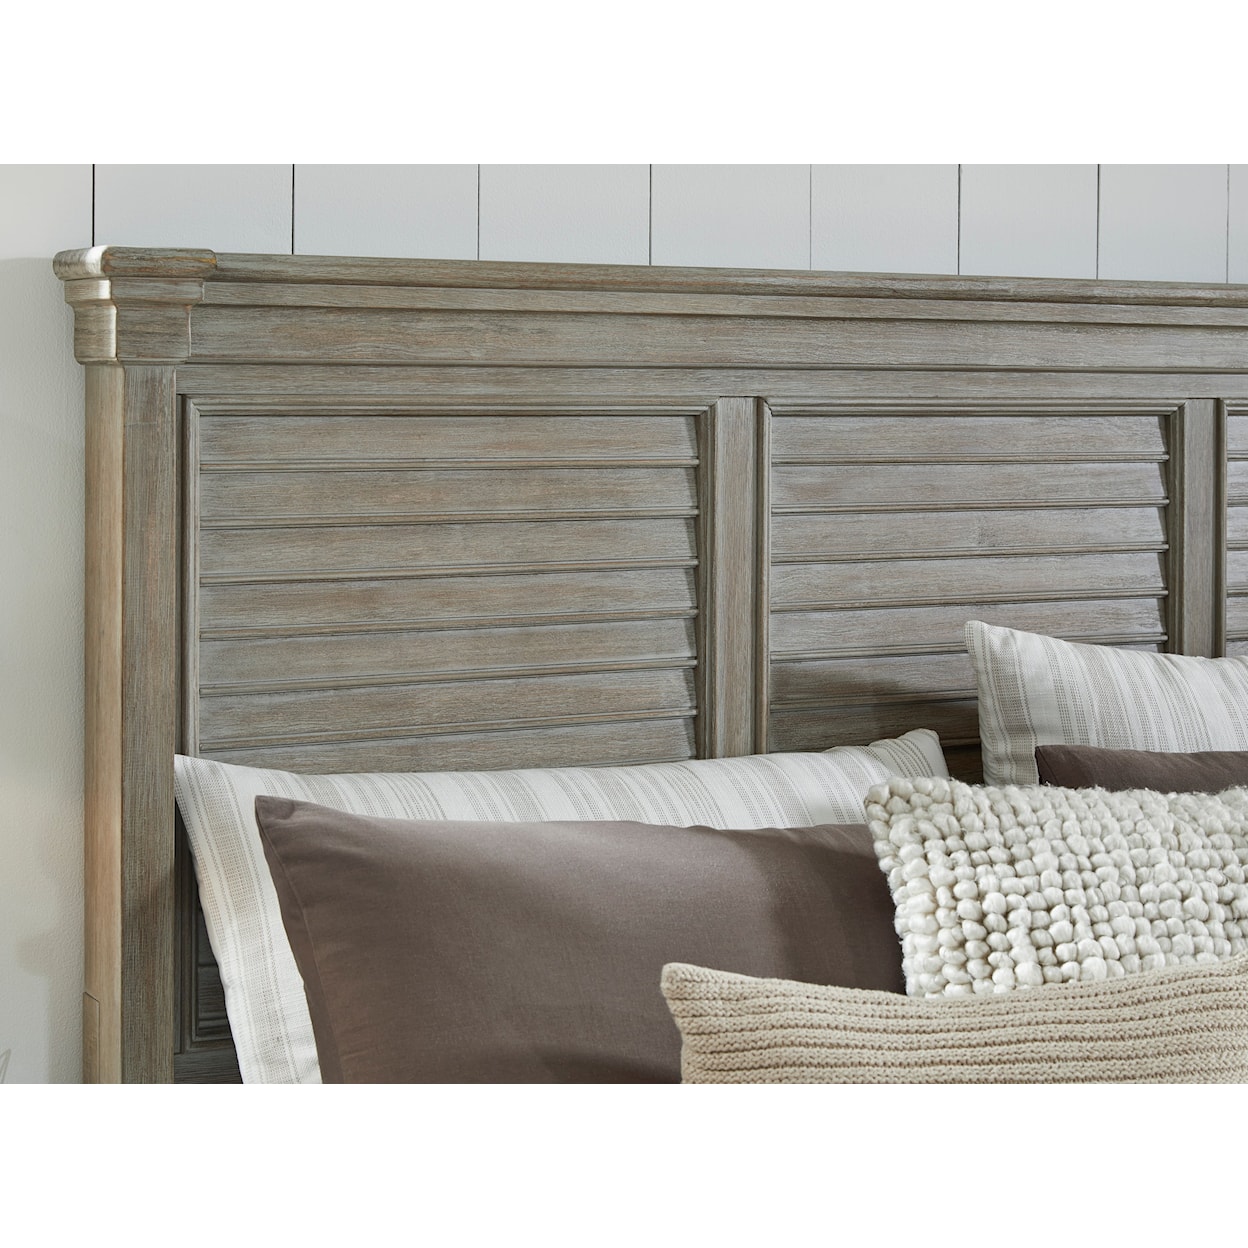 Signature Design by Ashley Moreshire California King Panel Bed